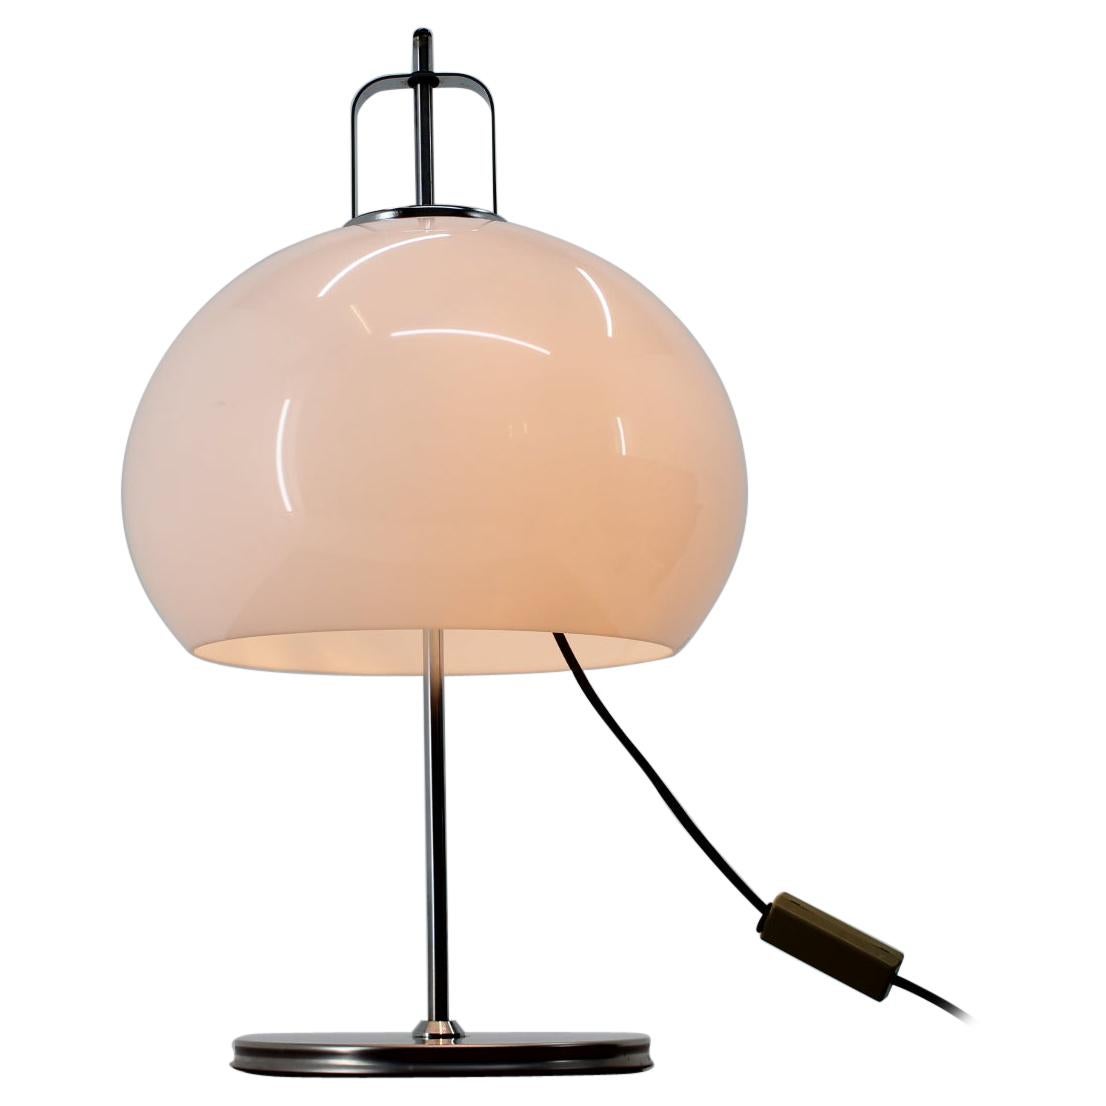 Big Midcentury Table Lamp by Meblo Designed by Harvey Guzzini, Italy, 1970s For Sale